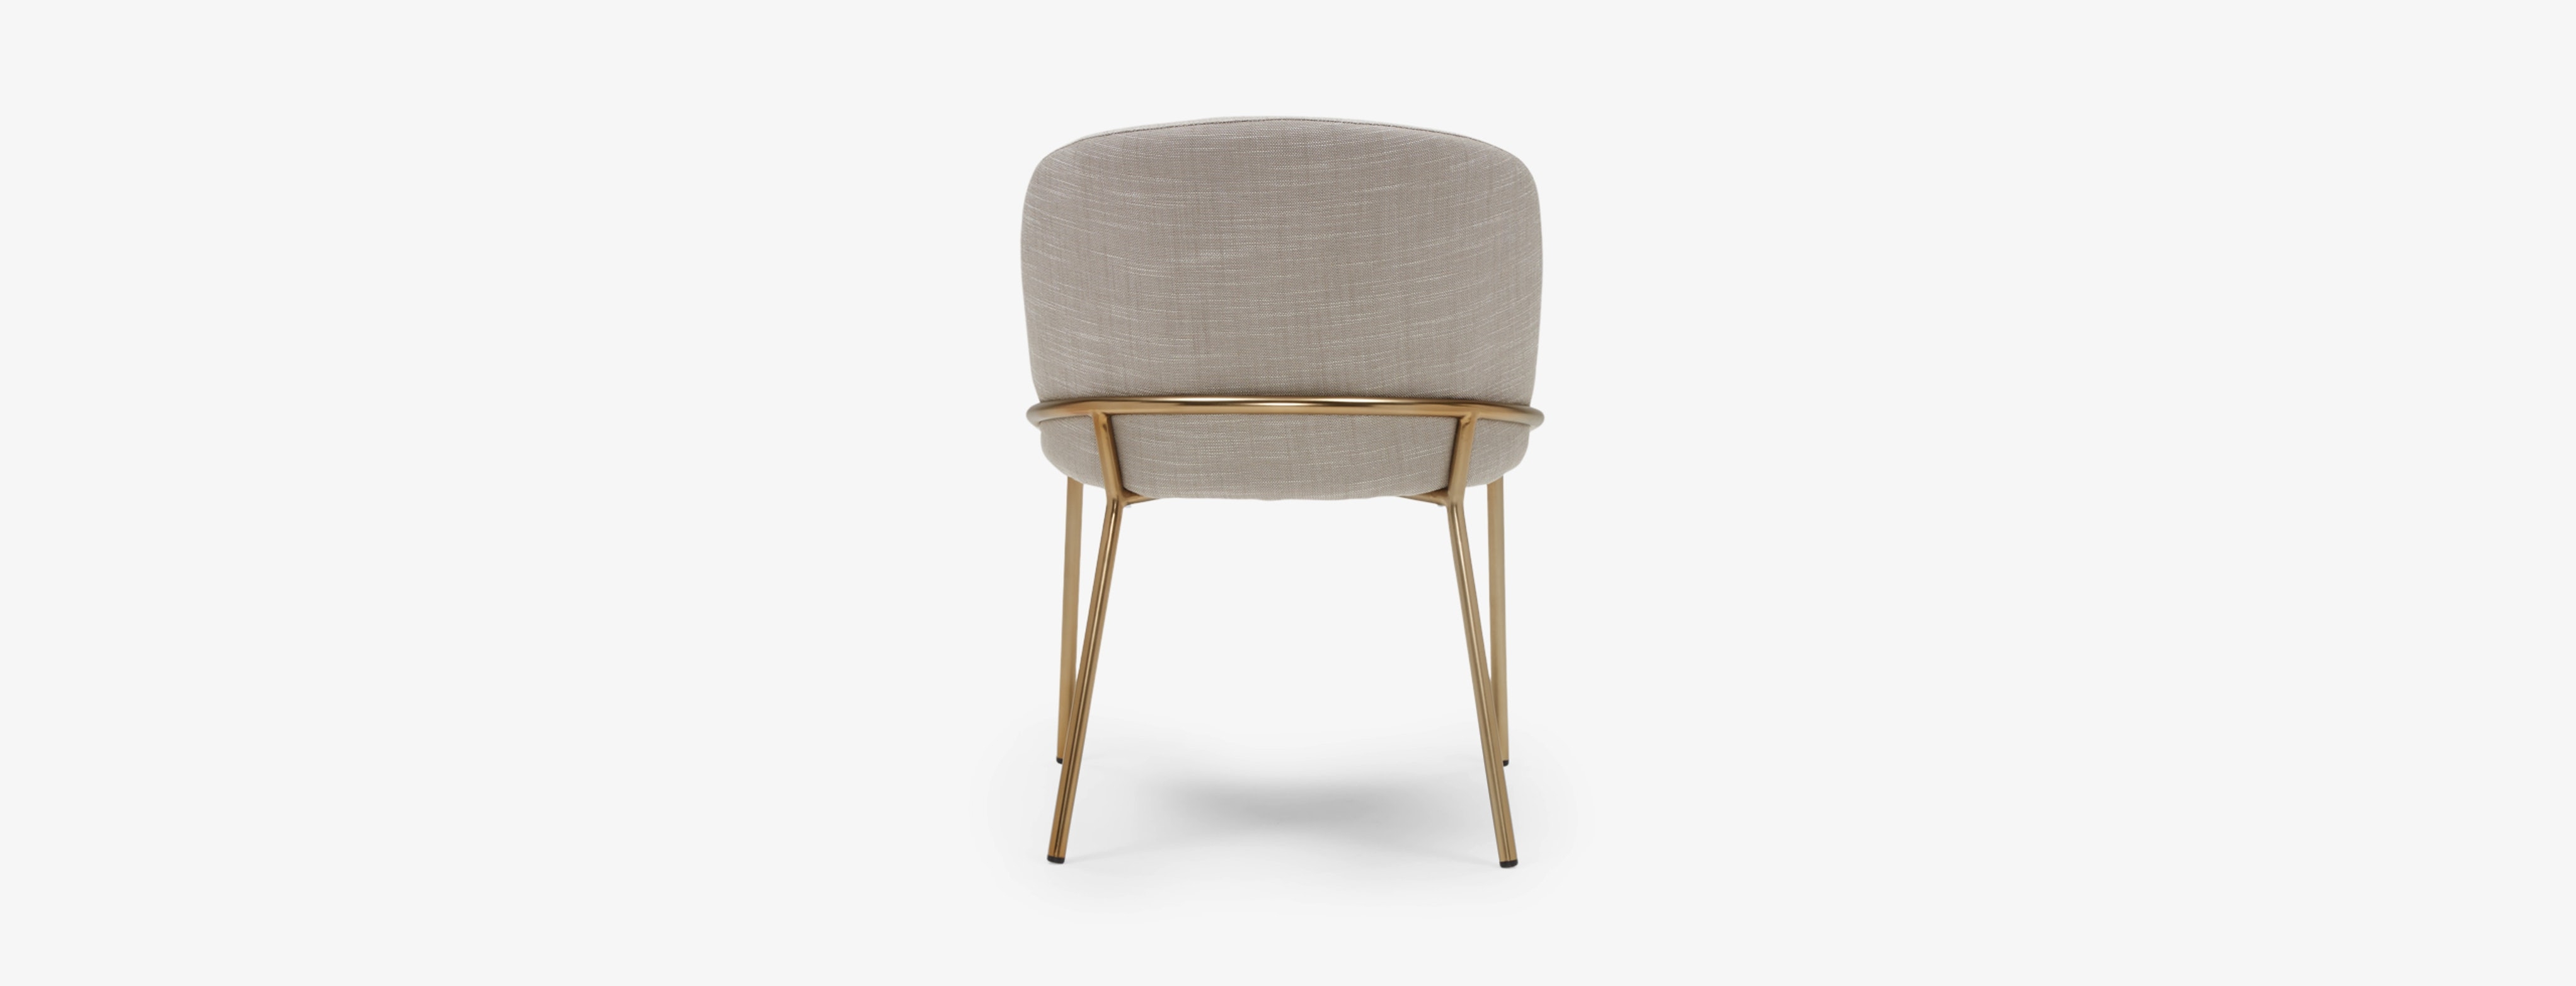 Janie Dining Chair - Image 2